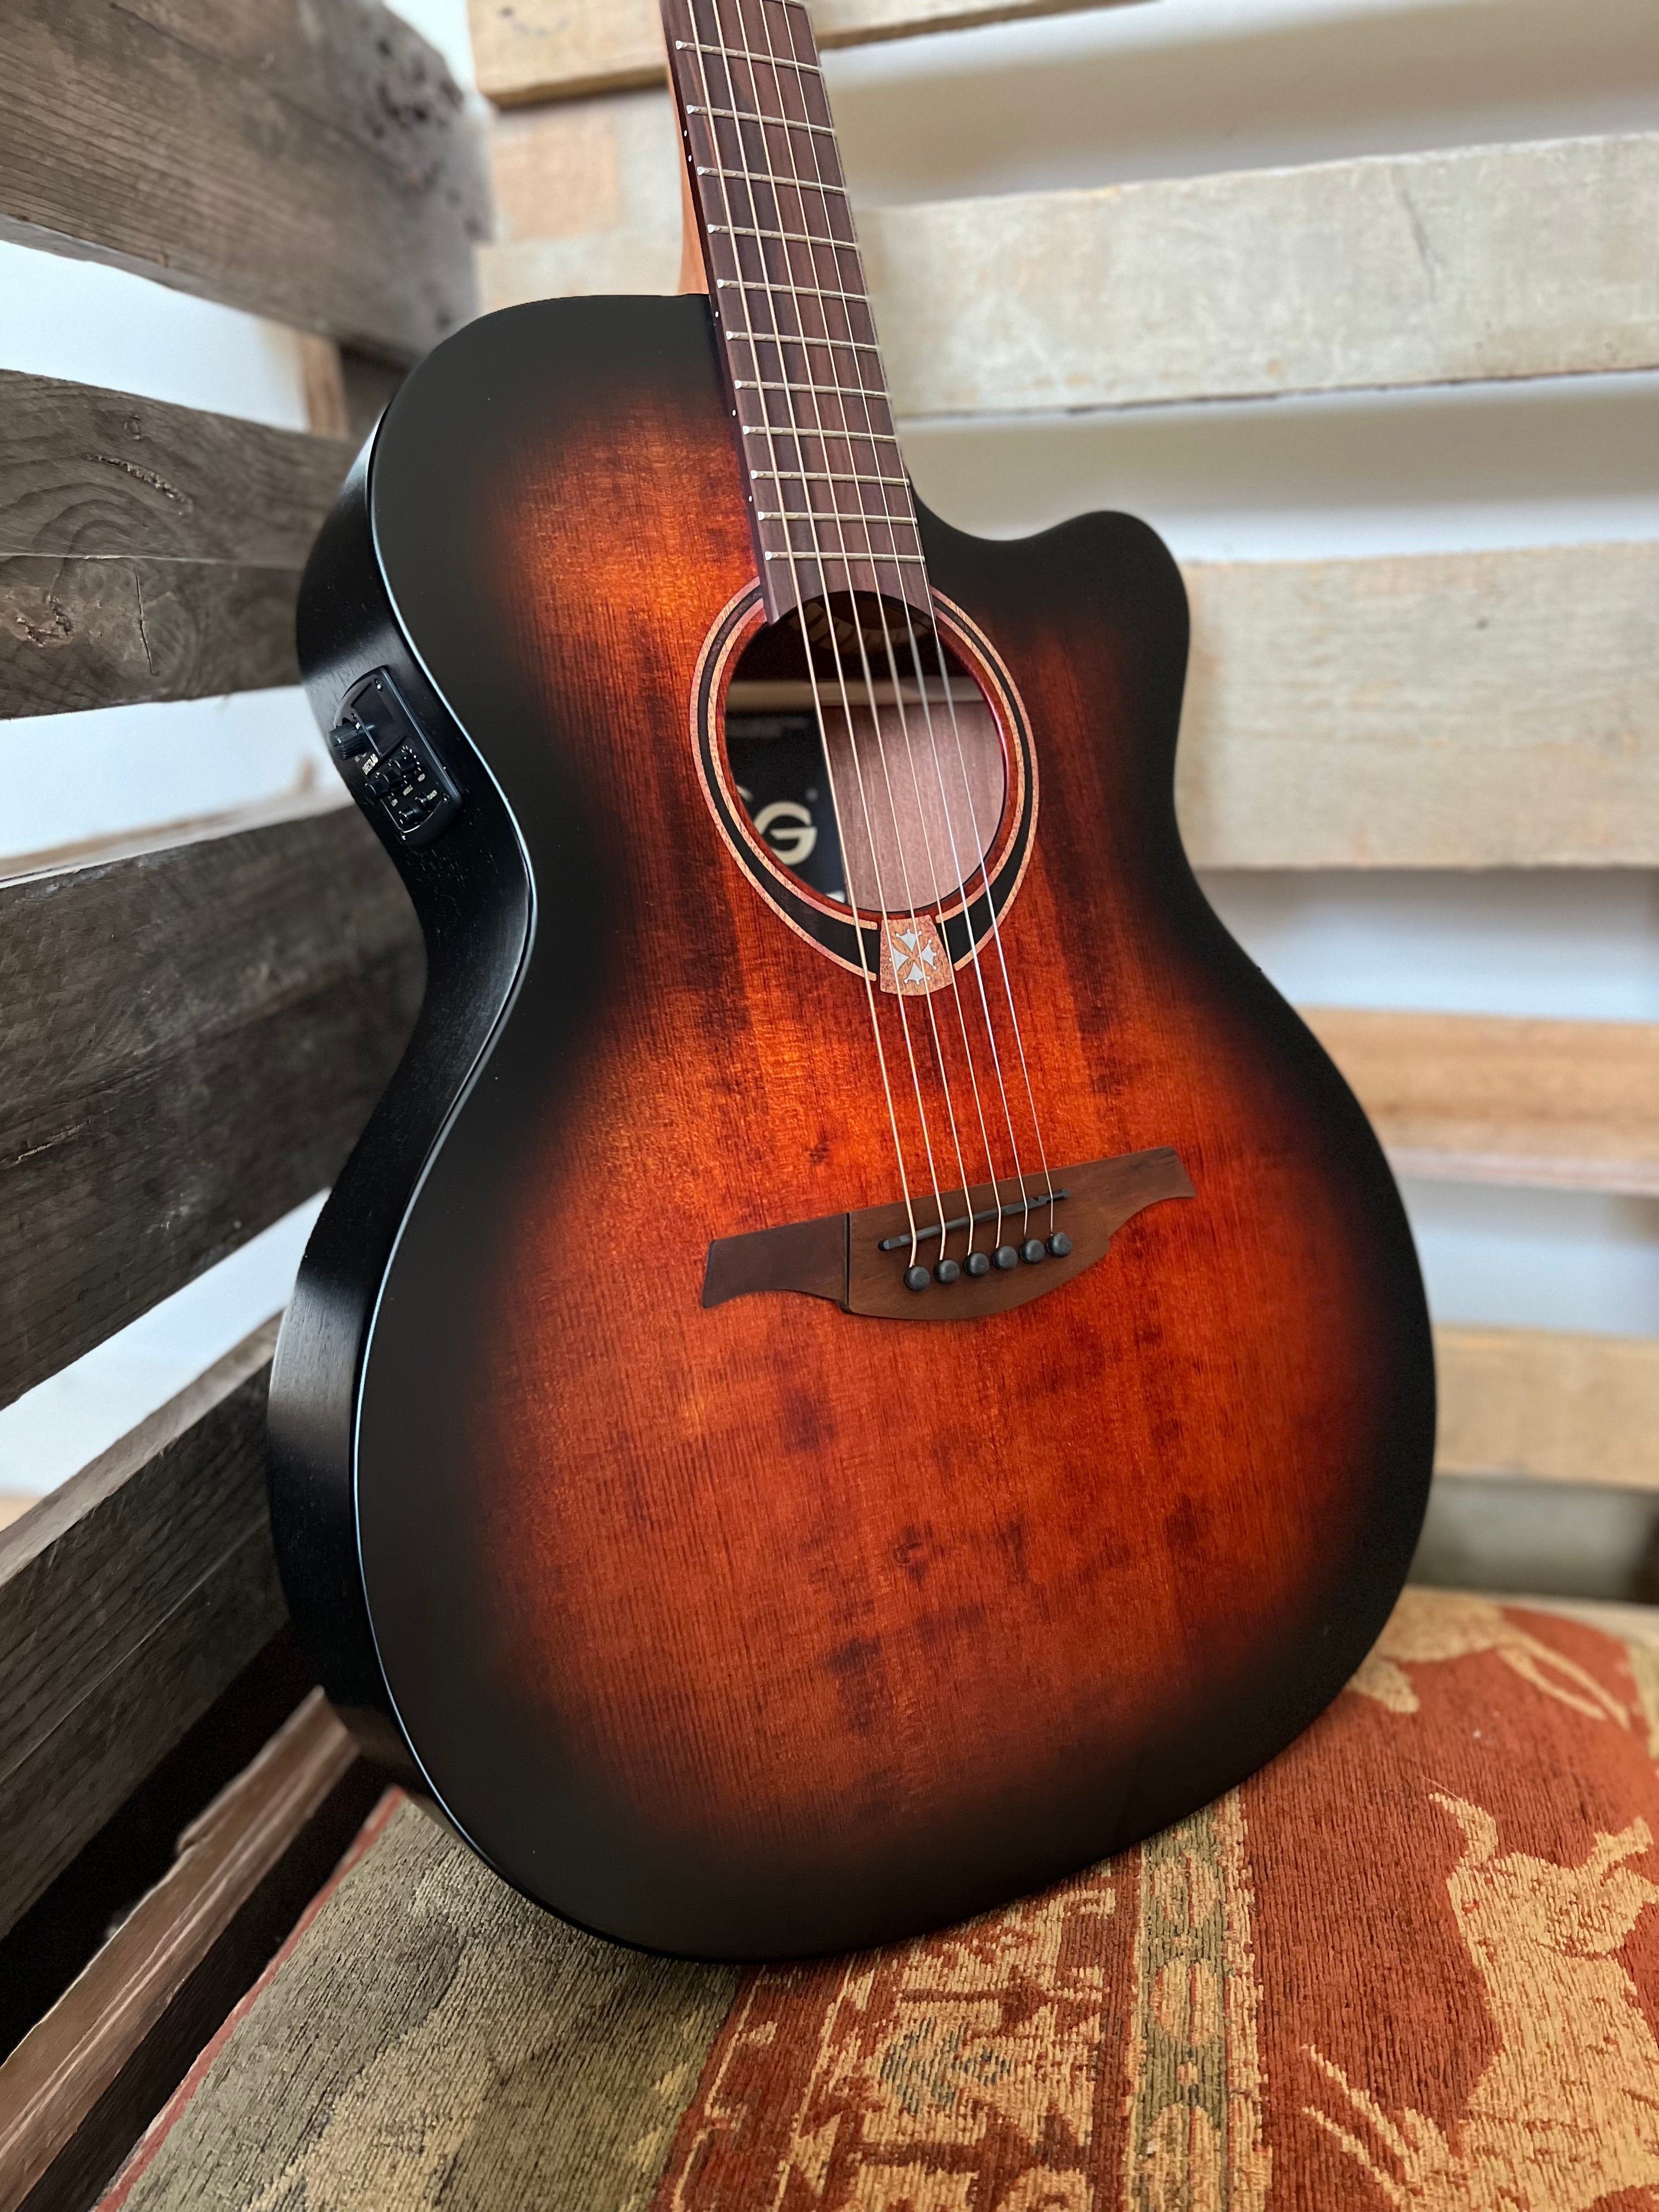 Lag T70ACE-B&B Auditorium Cutaway electro, Electro Acoustic Guitar for sale at Richards Guitars.